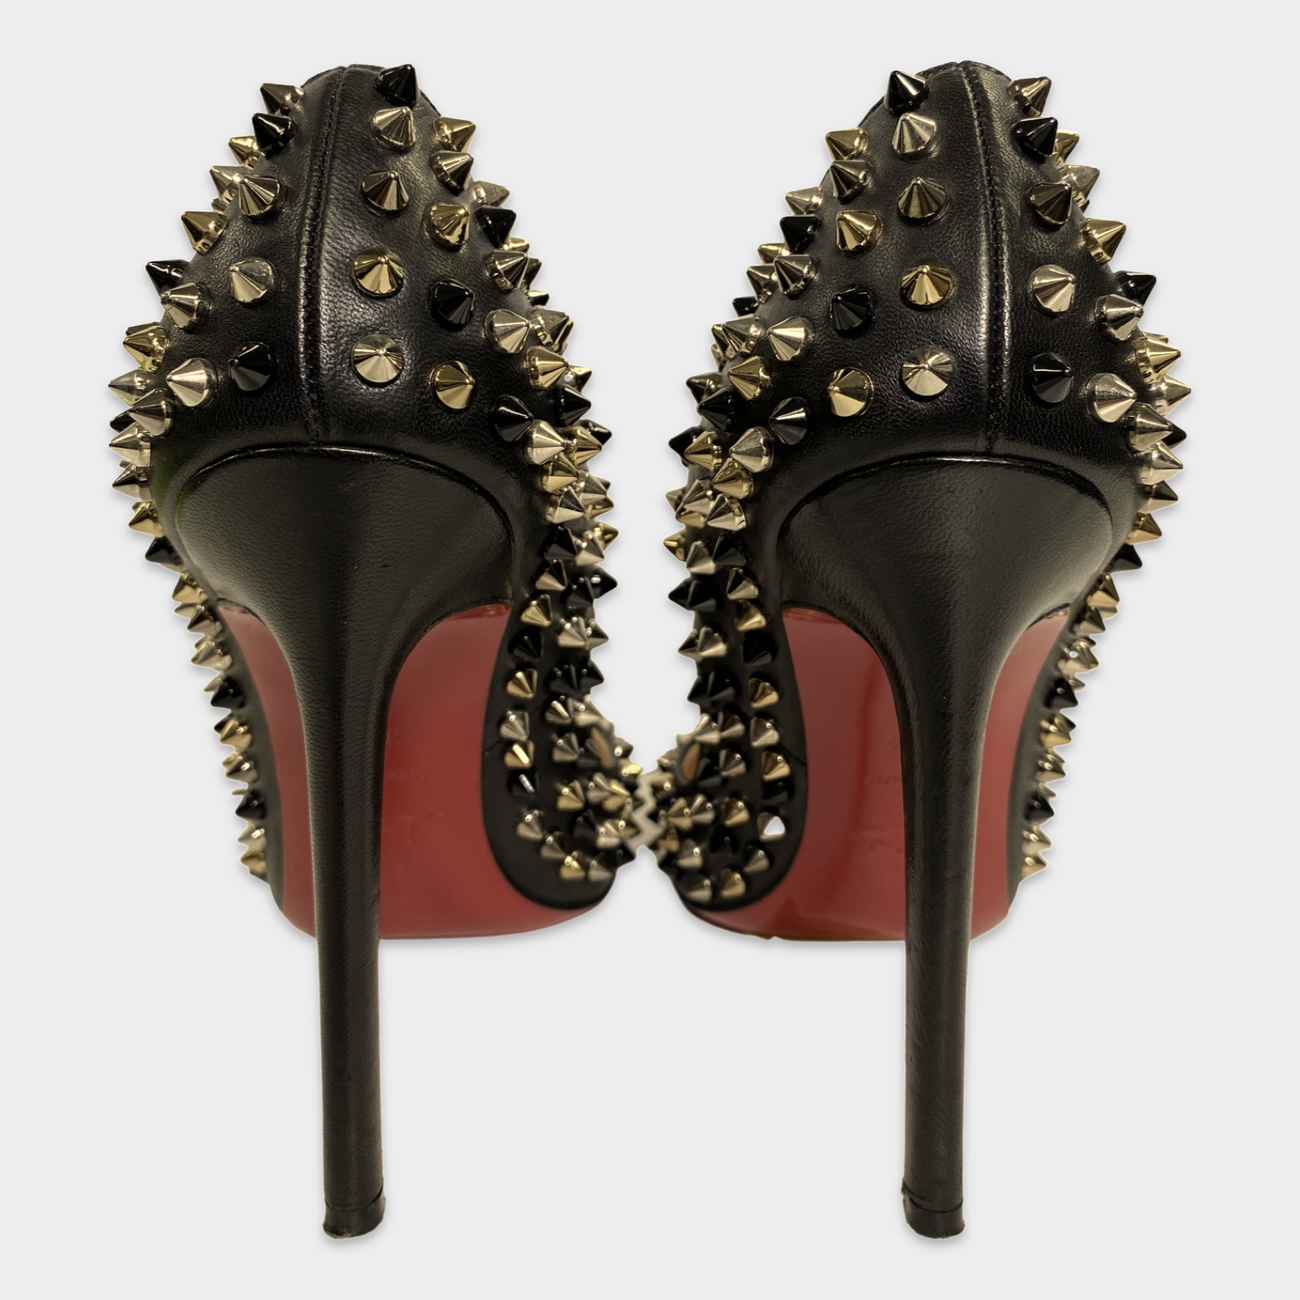 CHRISTIAN LOUBOUTIN black and gold studded pumps – Loop Generation